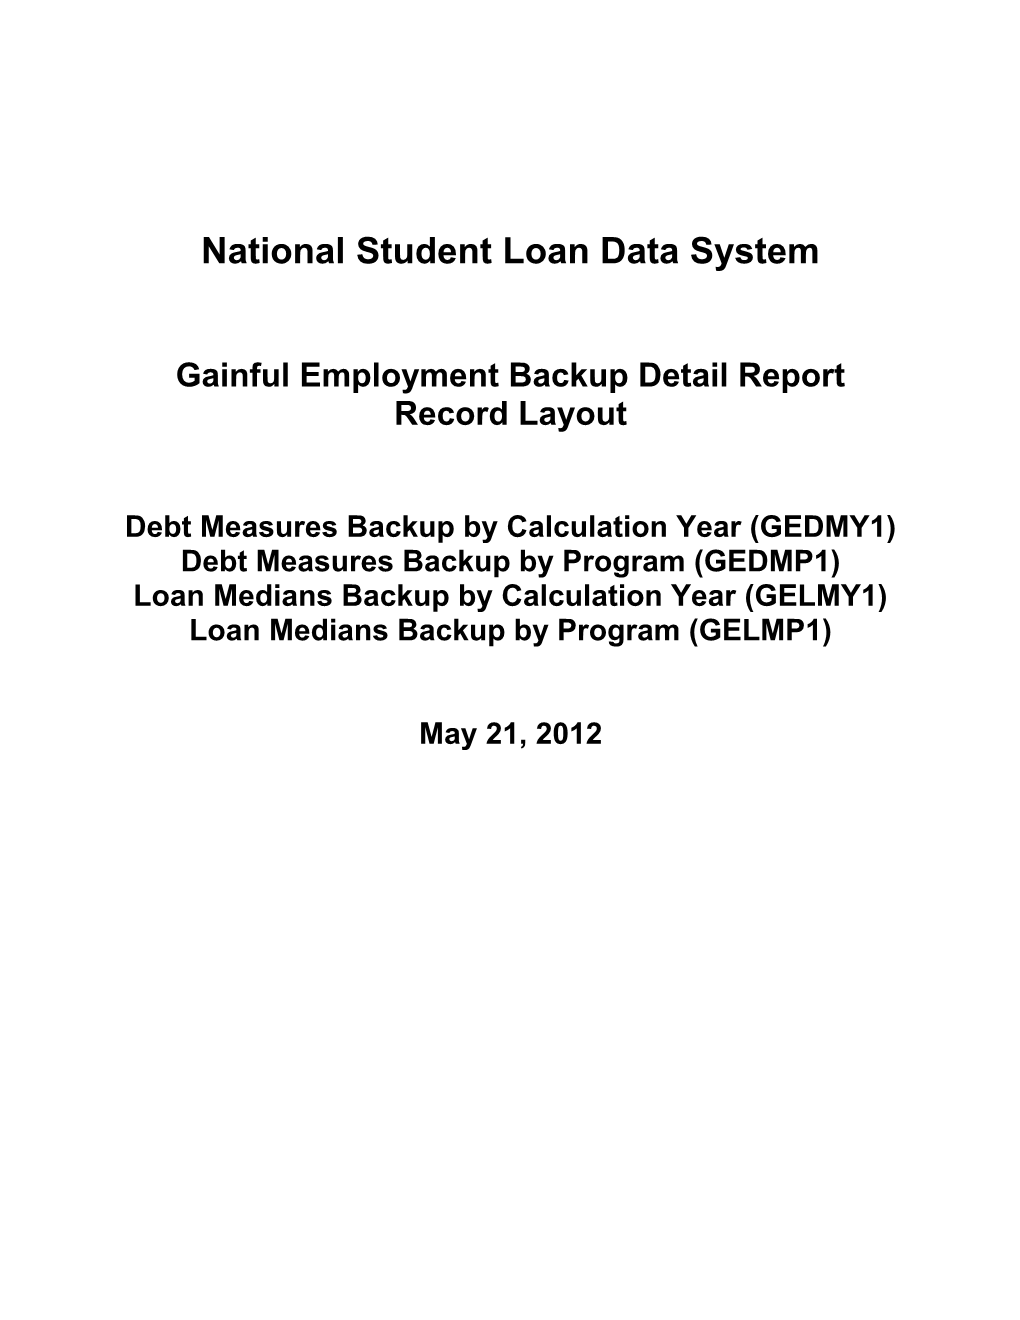 Gainful Employment Backup Detail Report Record Layout